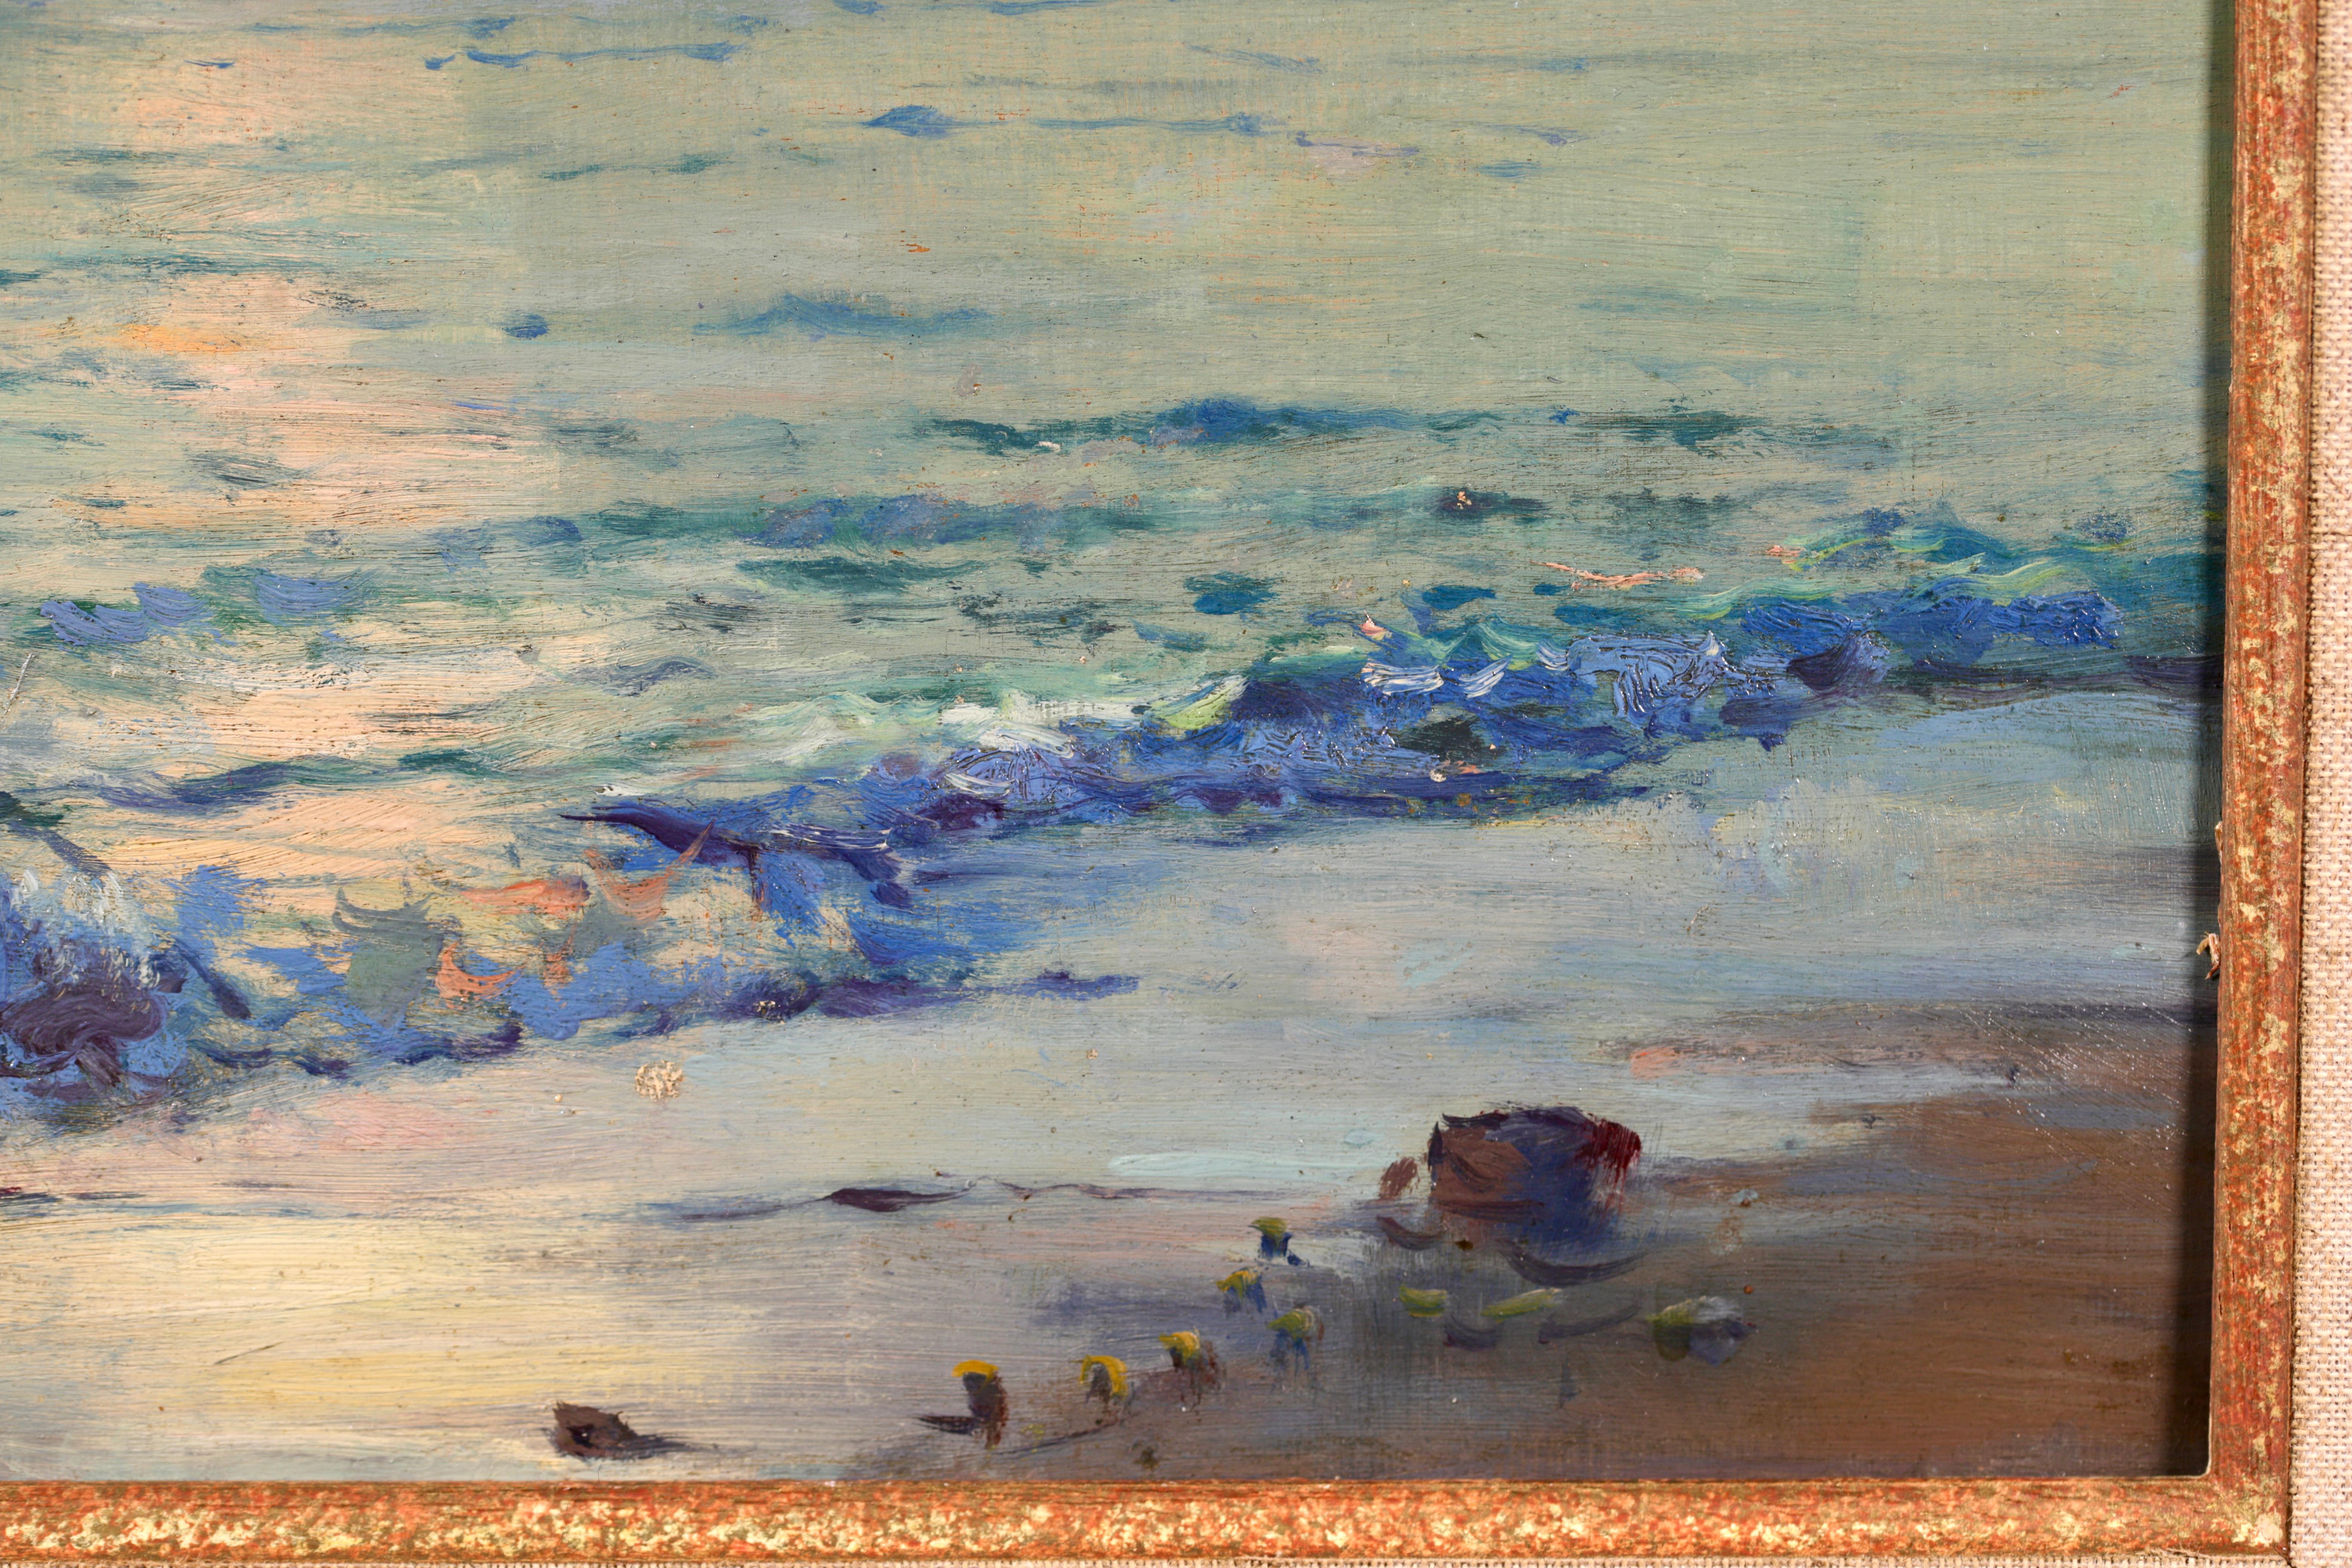 Sunset on the Coast - Impressionist Oil, Birds in Seacape by William Blair Bruce 5